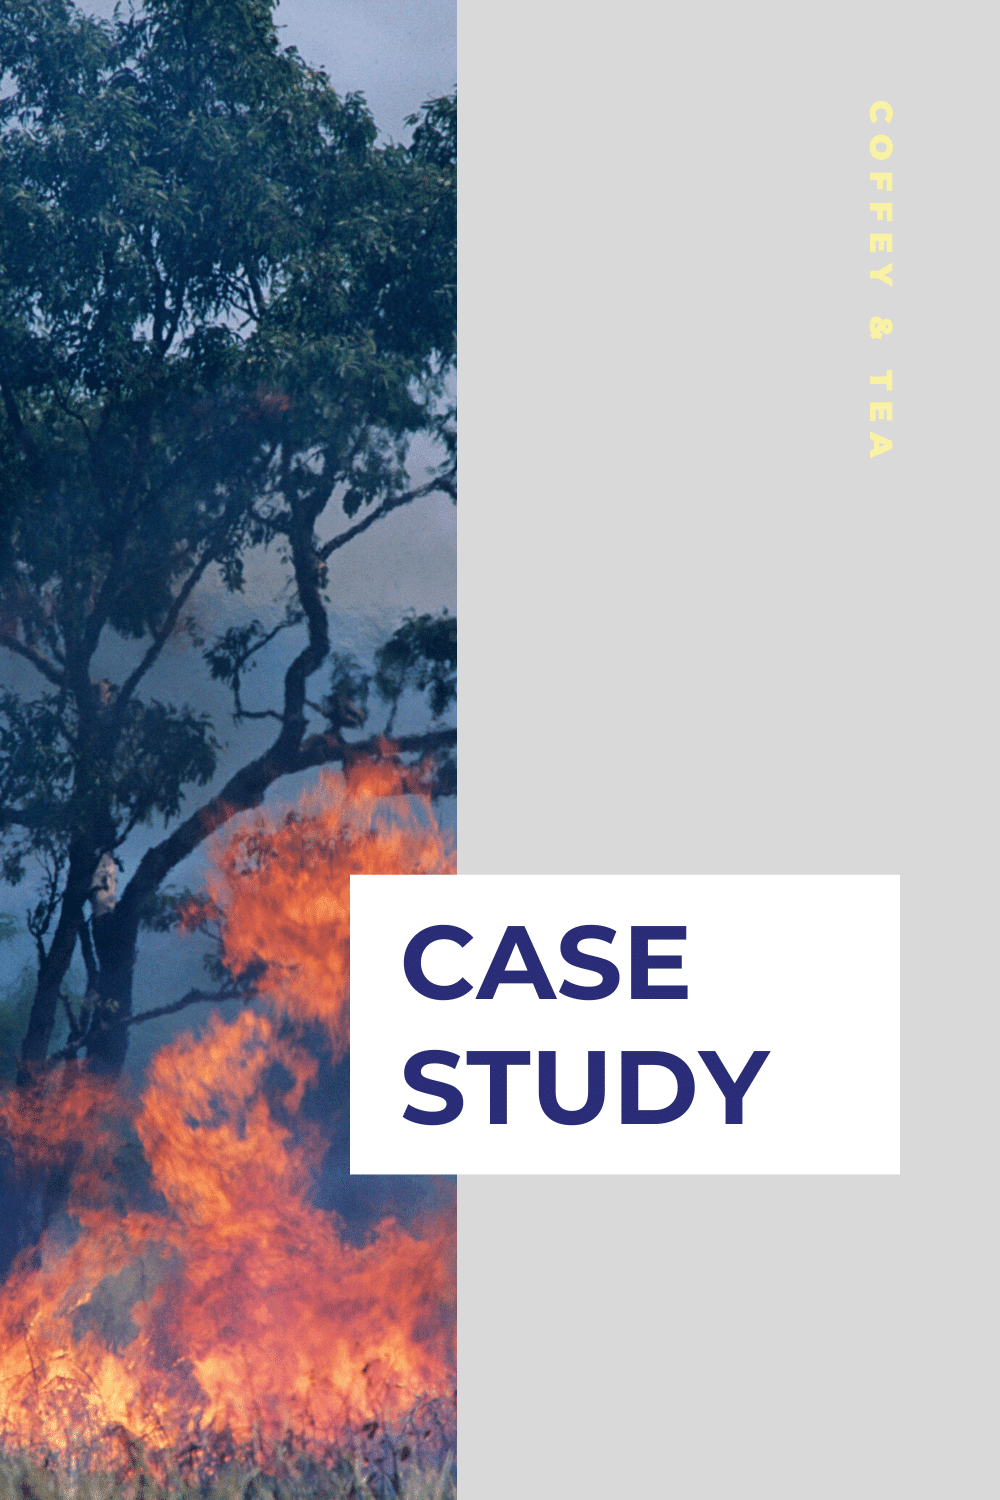 Case Study: Department of Fire & Emergency Services